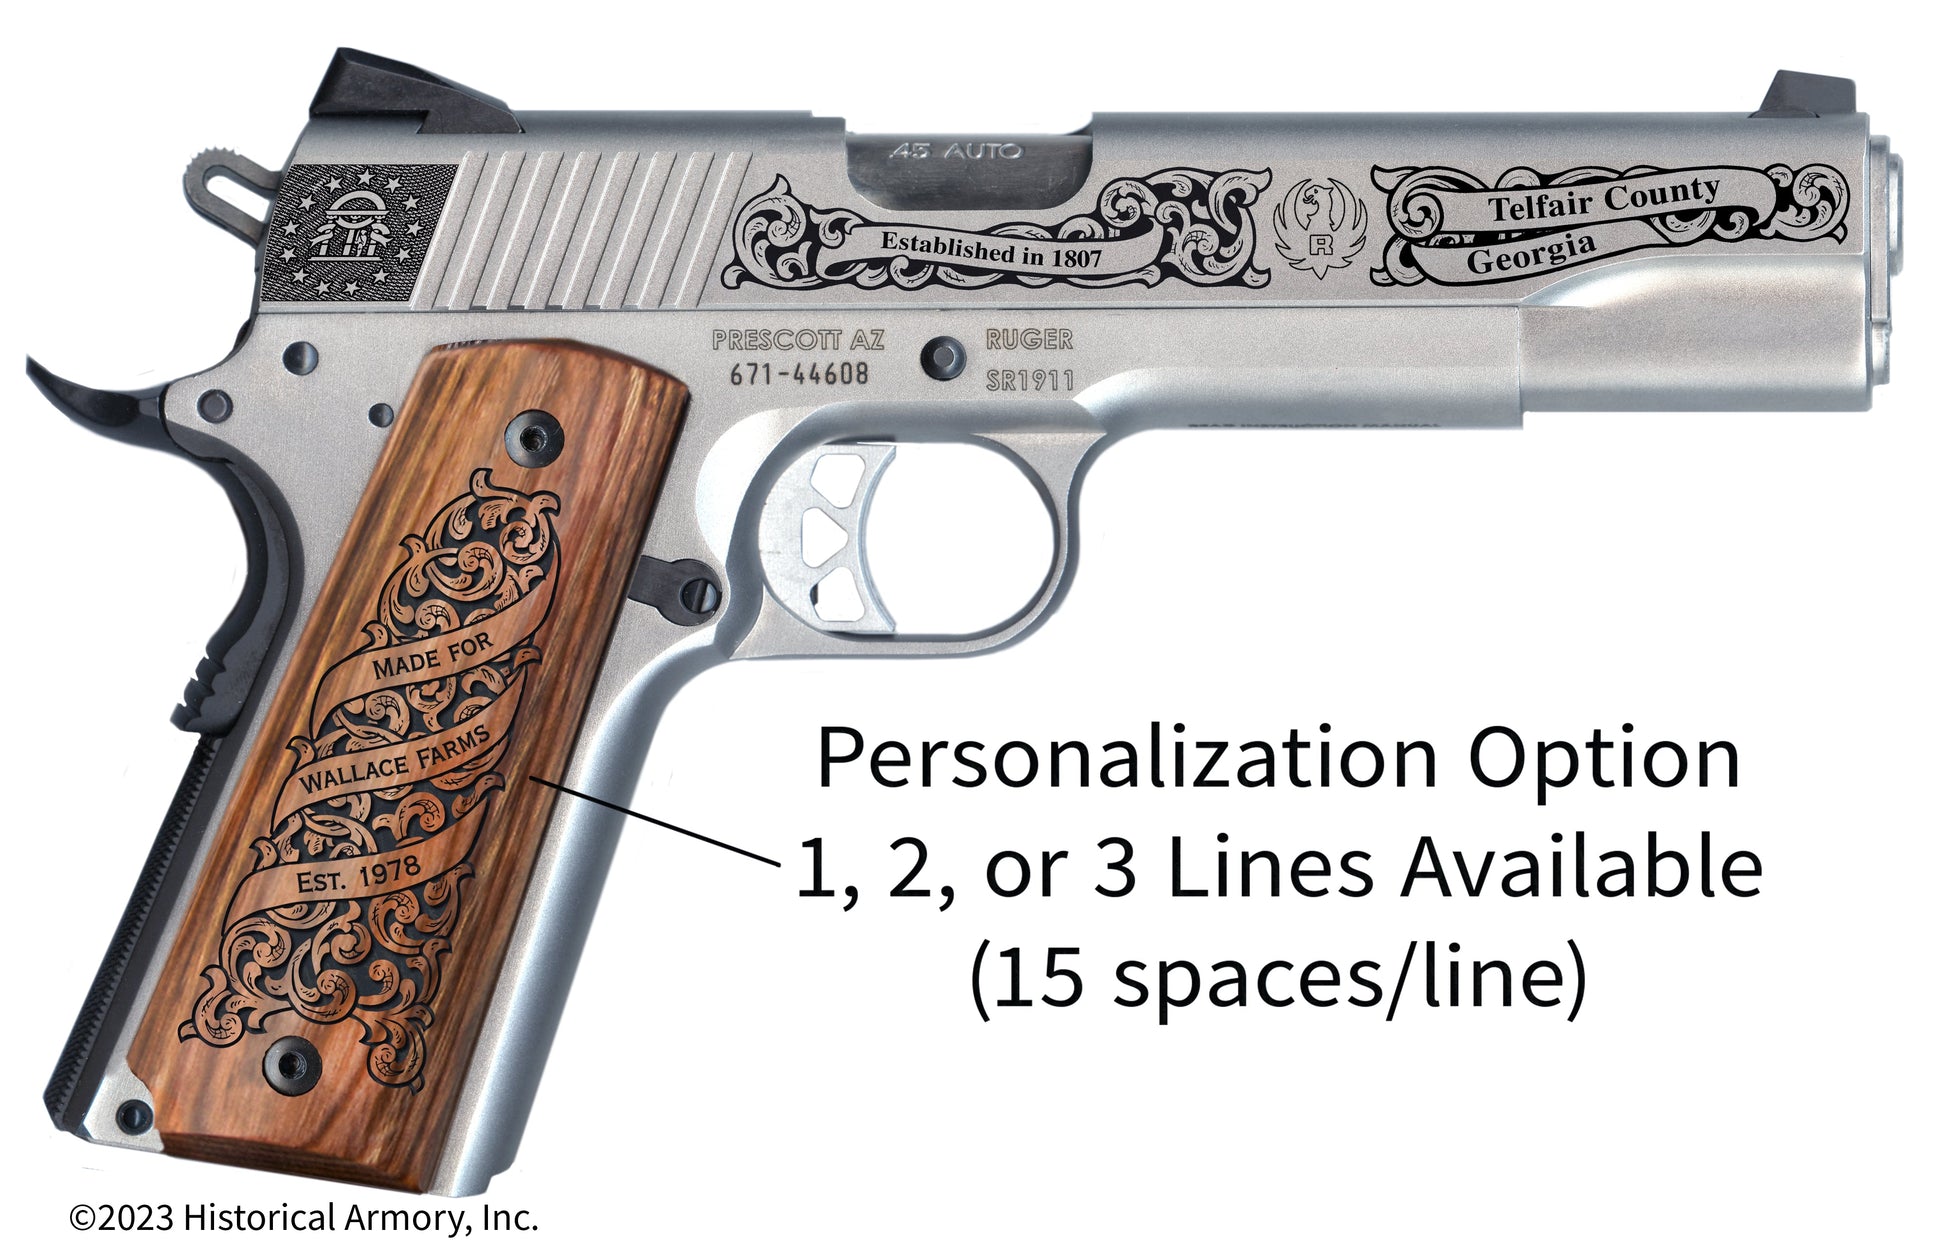 Telfair County Georgia Personalized Engraved .45 Auto Ruger 1911